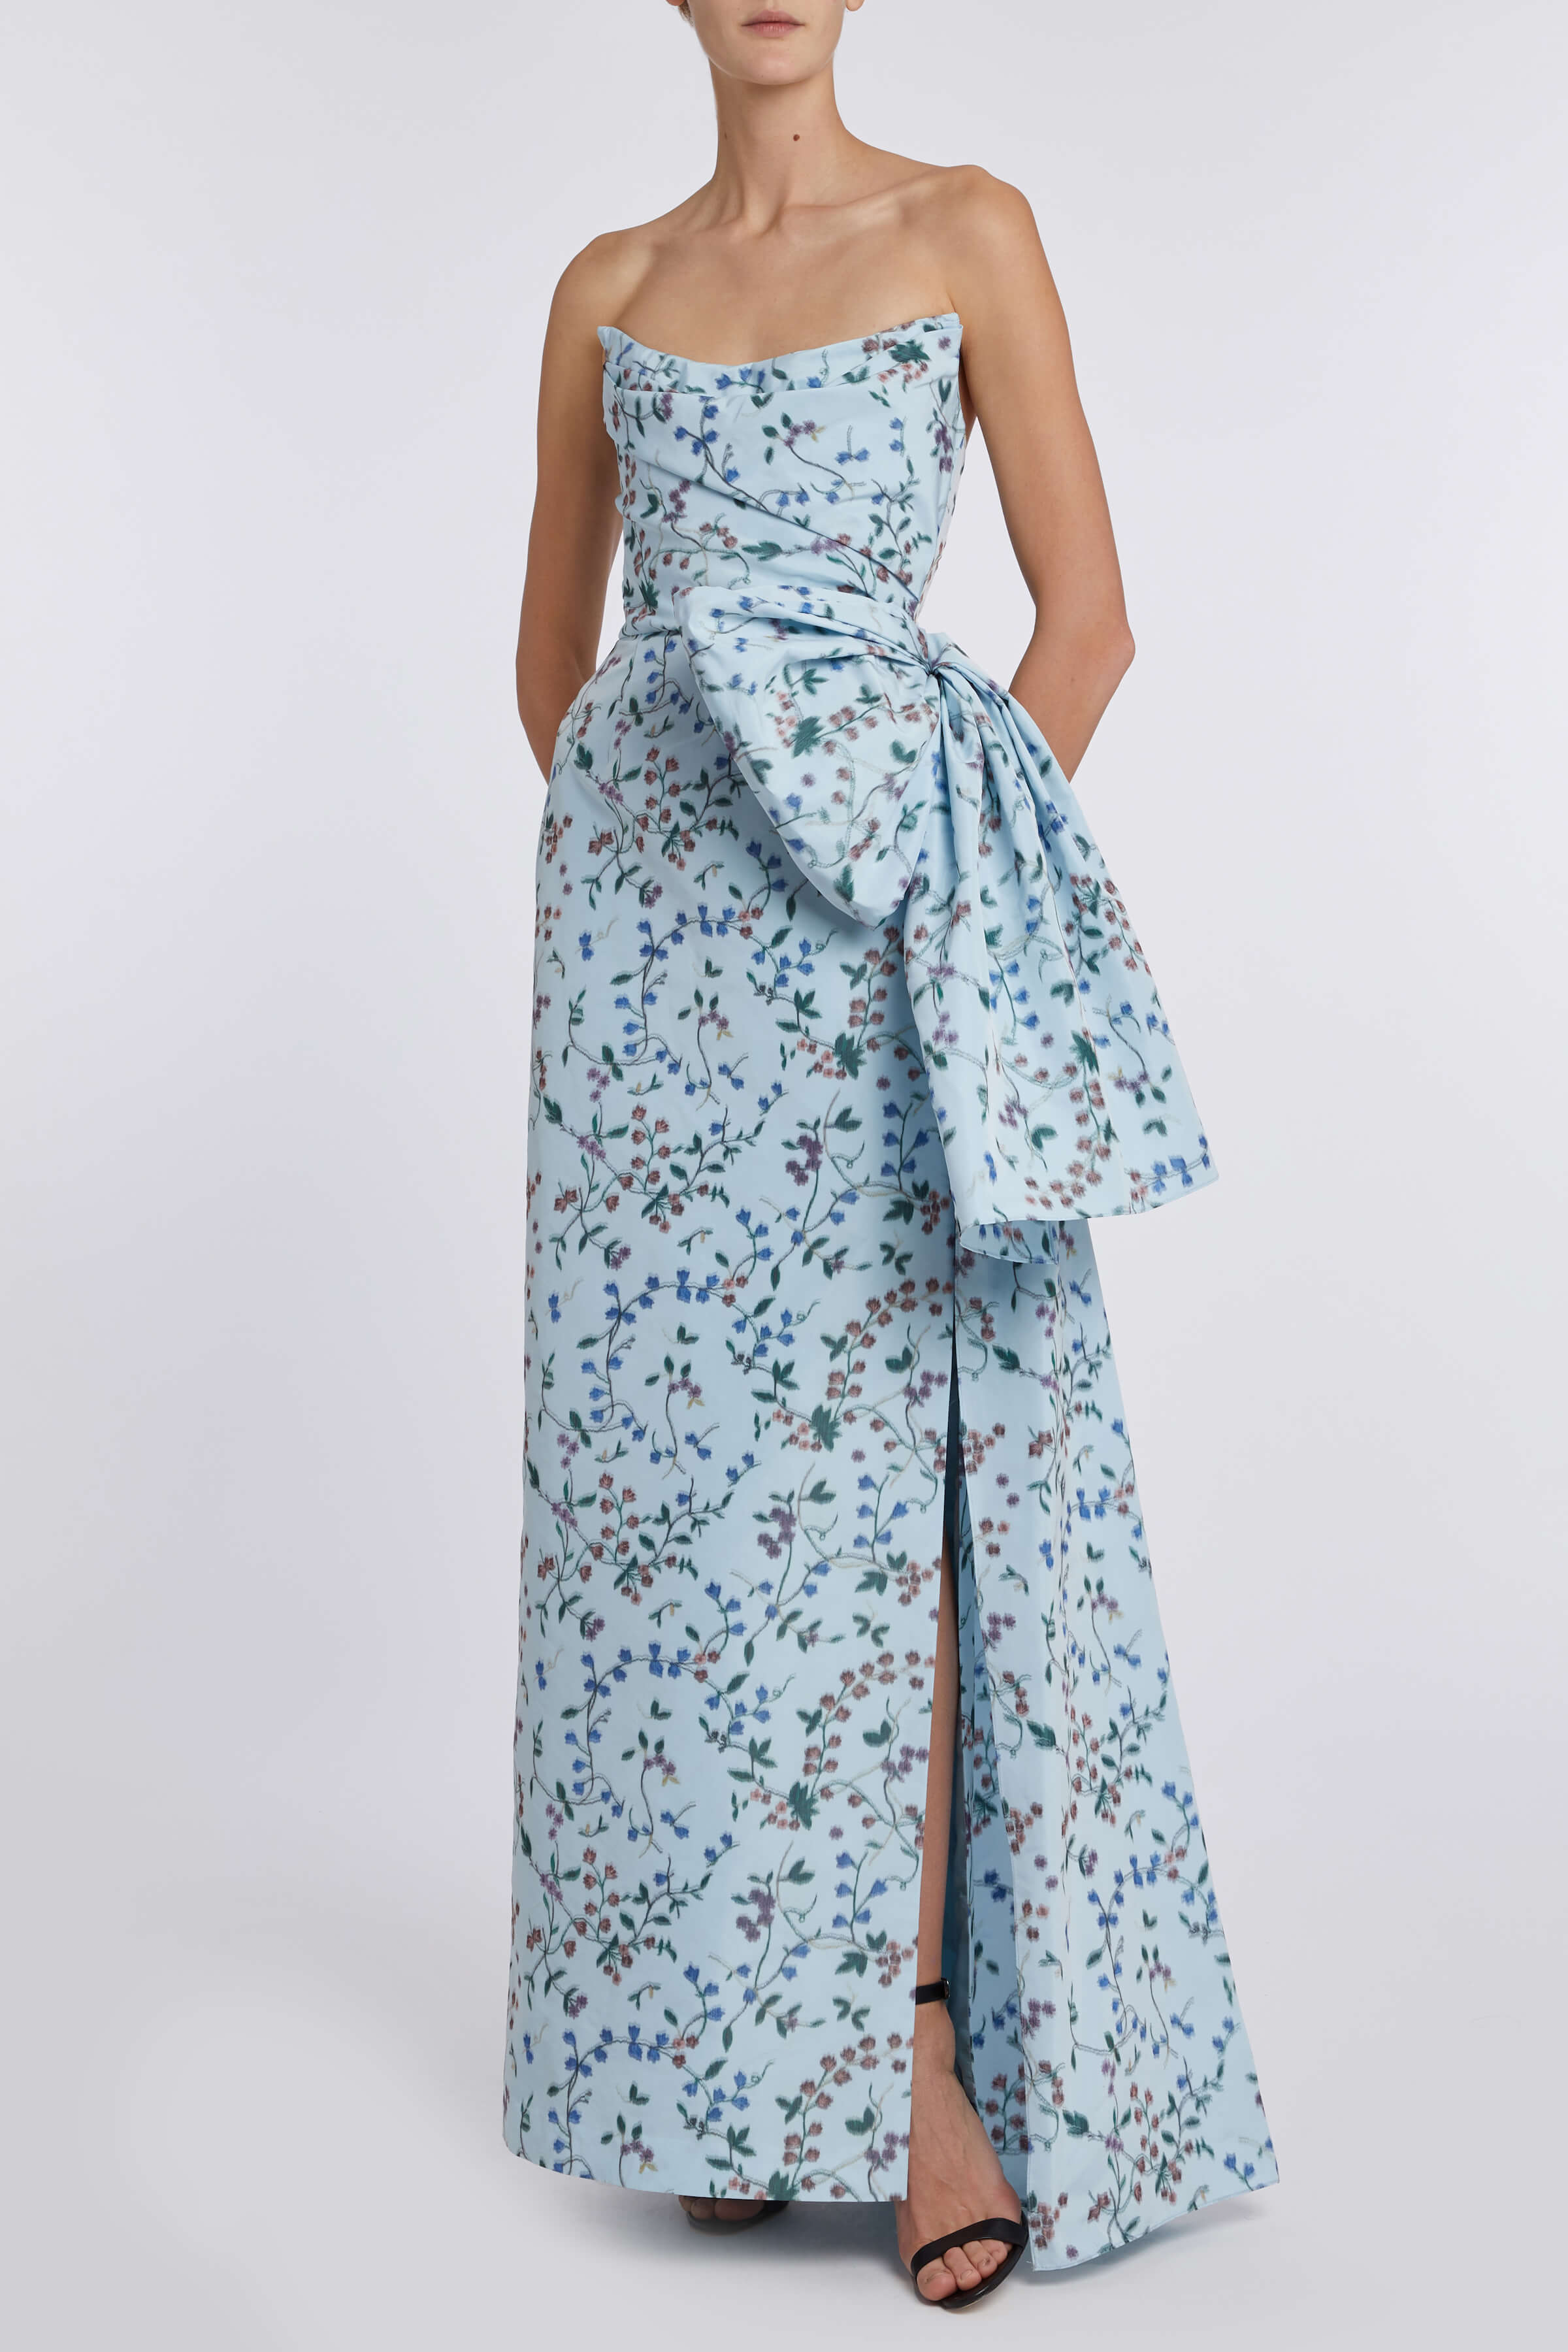 Athena Blue Ikat Strapless Gown